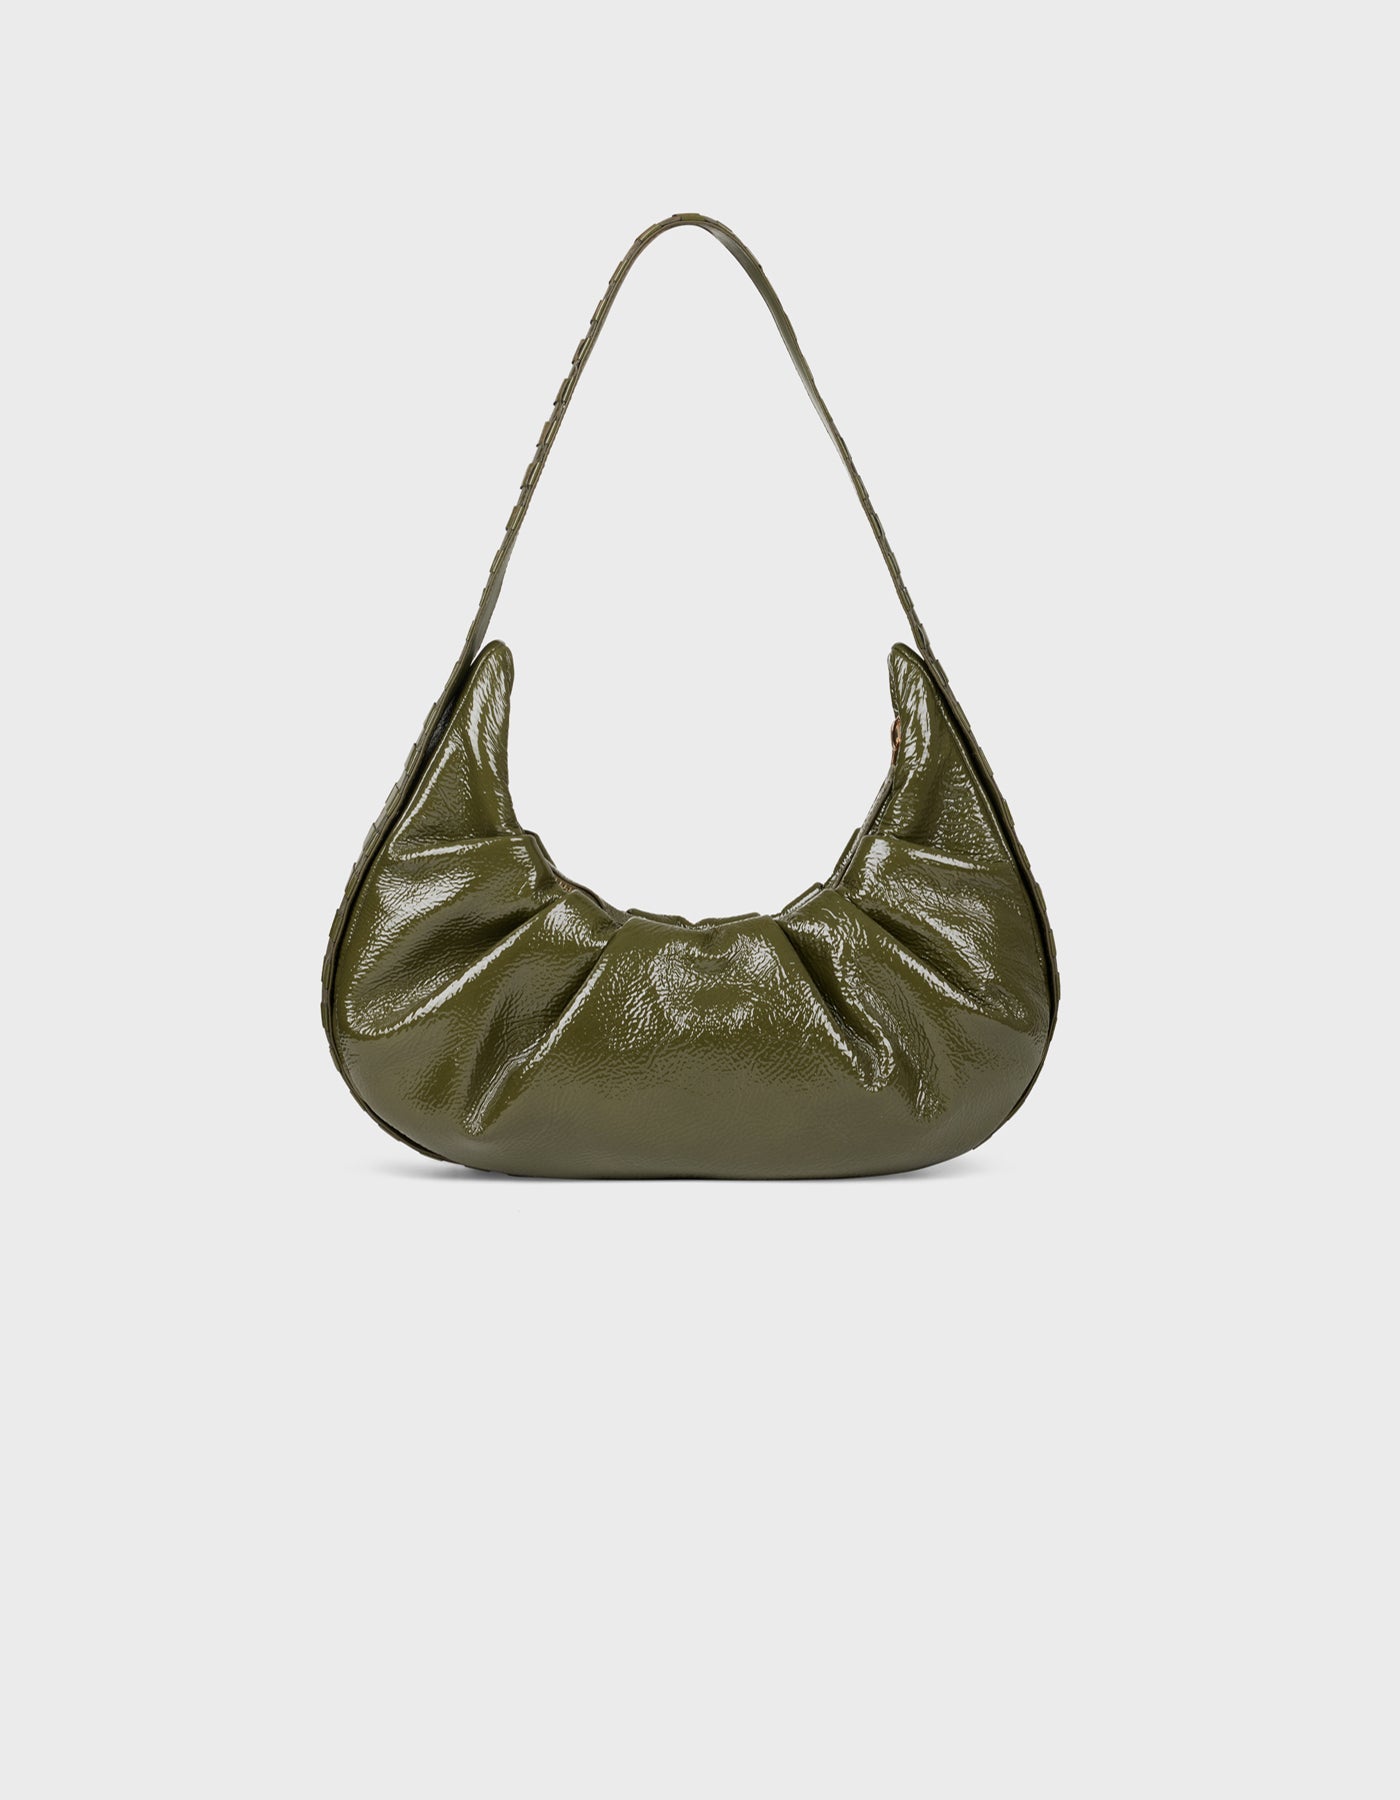 Croissant Bag - Finest Quality HiVa Atelier GmbH Leather Accessories